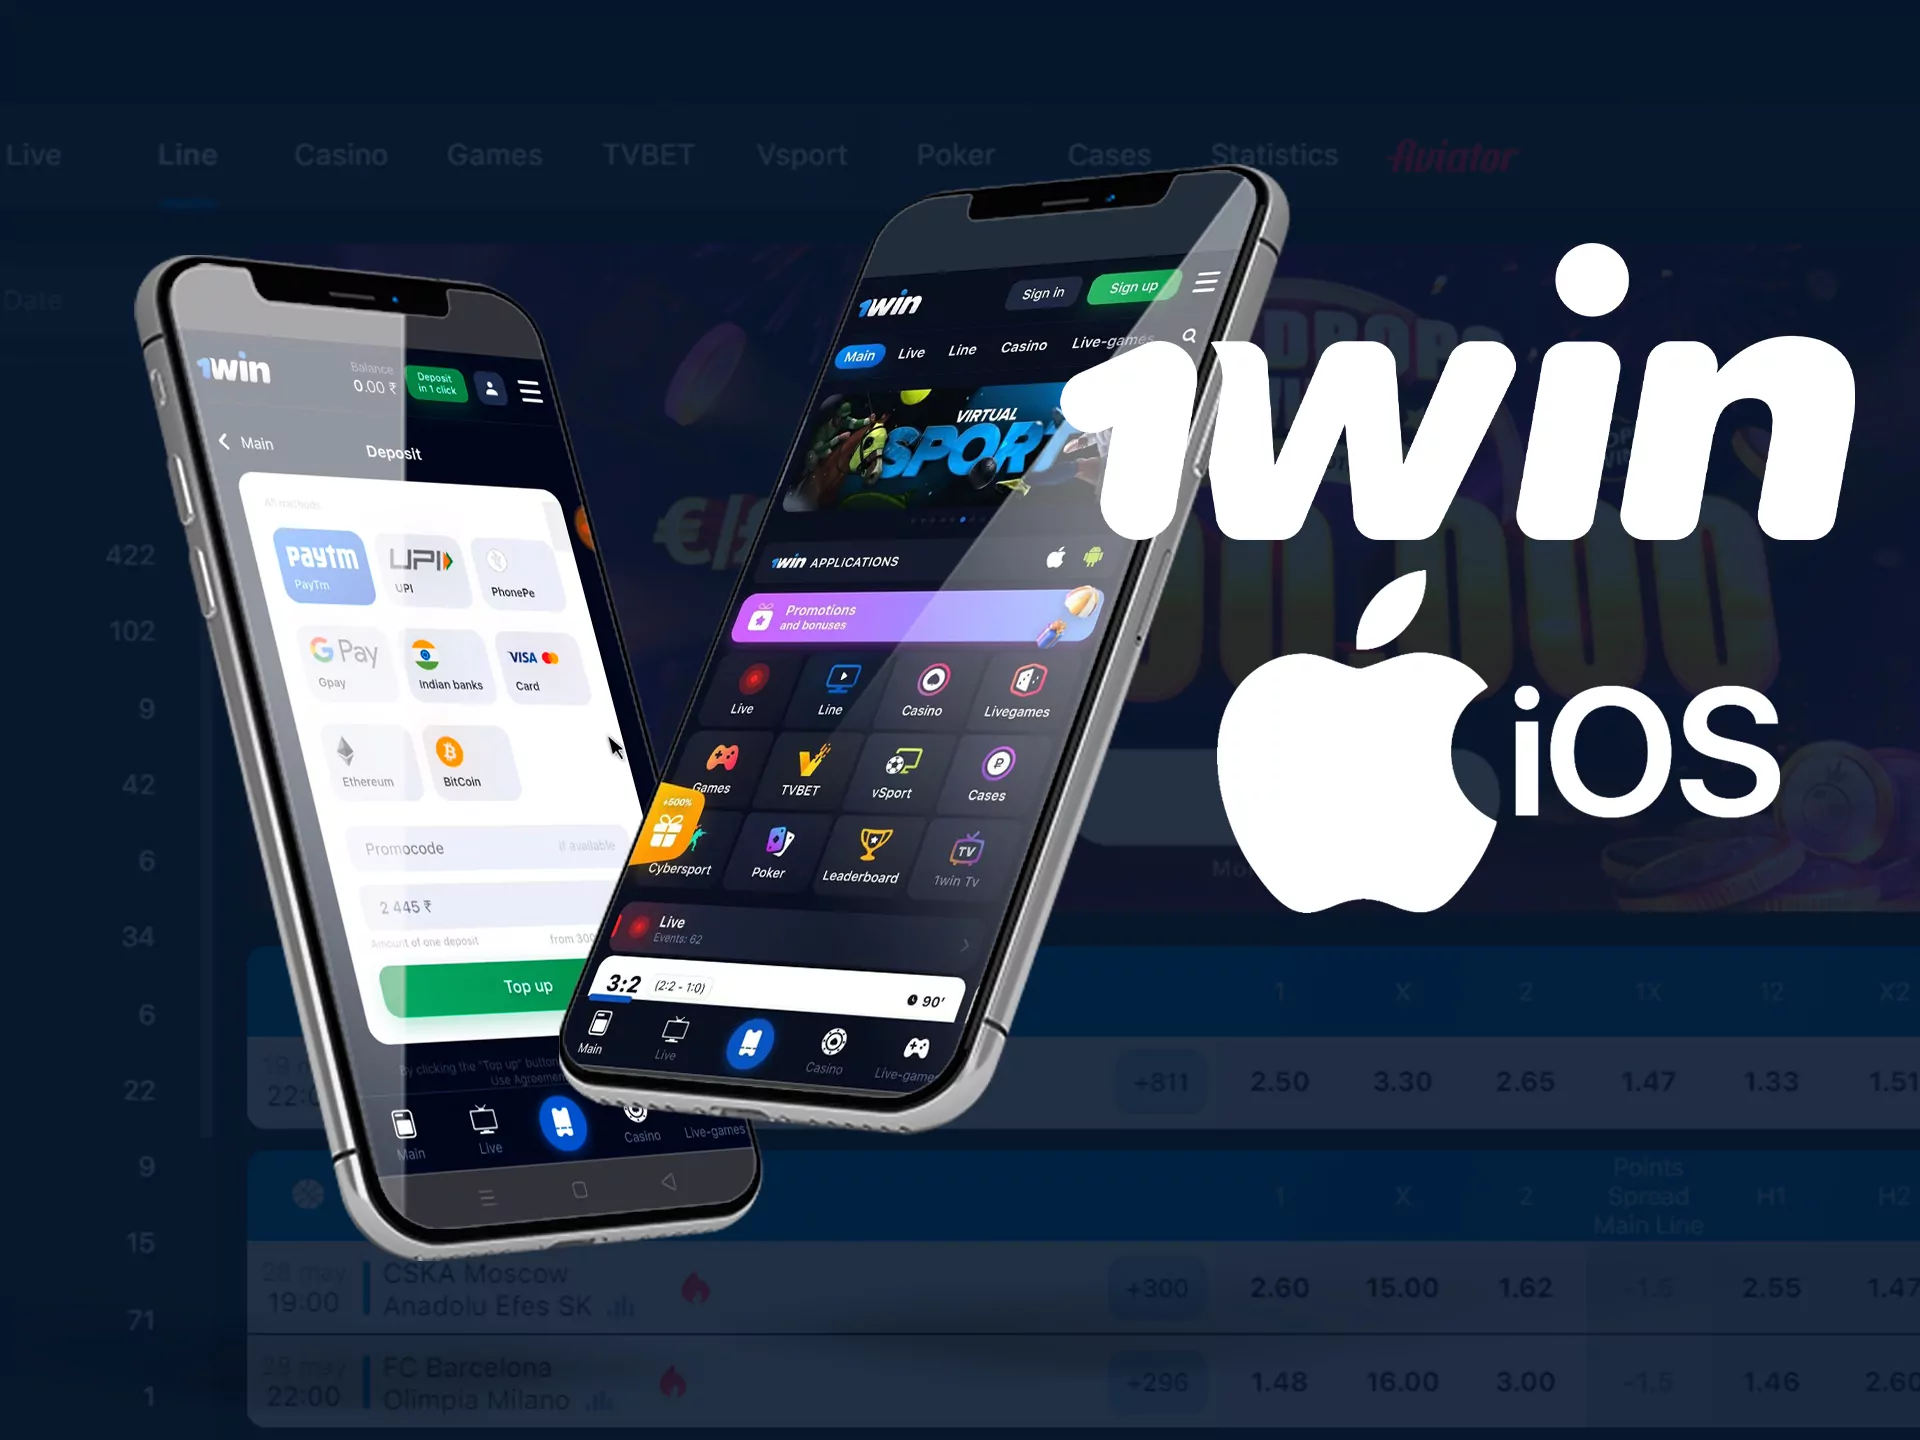 1win app for iPhone